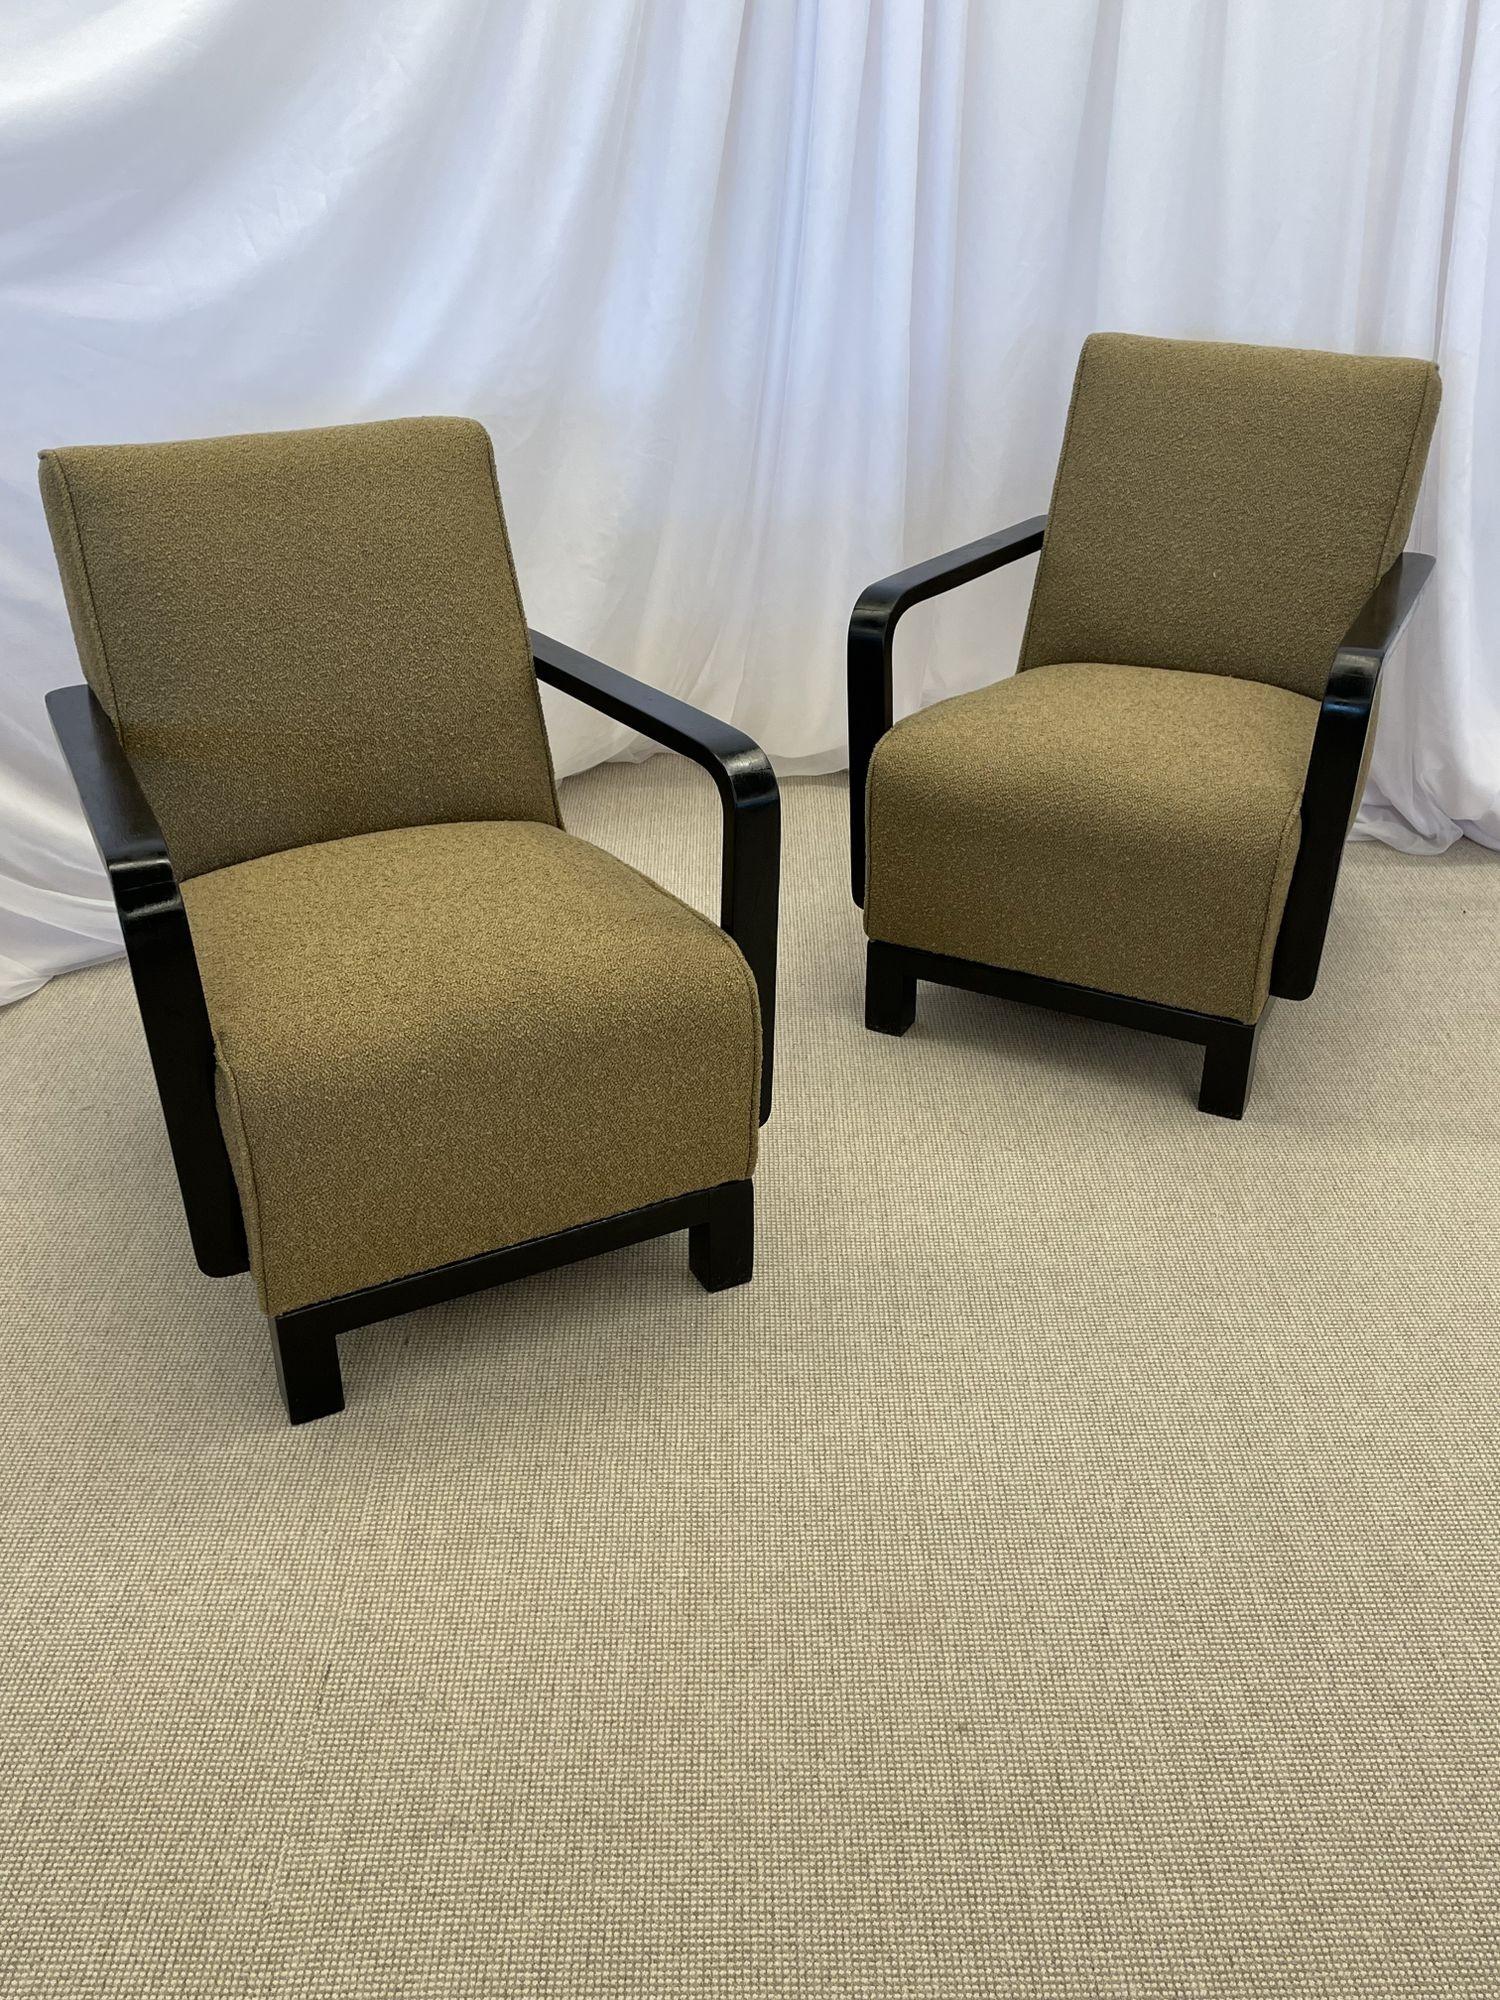 Pair of Vintage Art Deco Lounge / Arm Chairs, Ebony Wood, Boucle, Sweden, 1940s In Good Condition For Sale In Stamford, CT